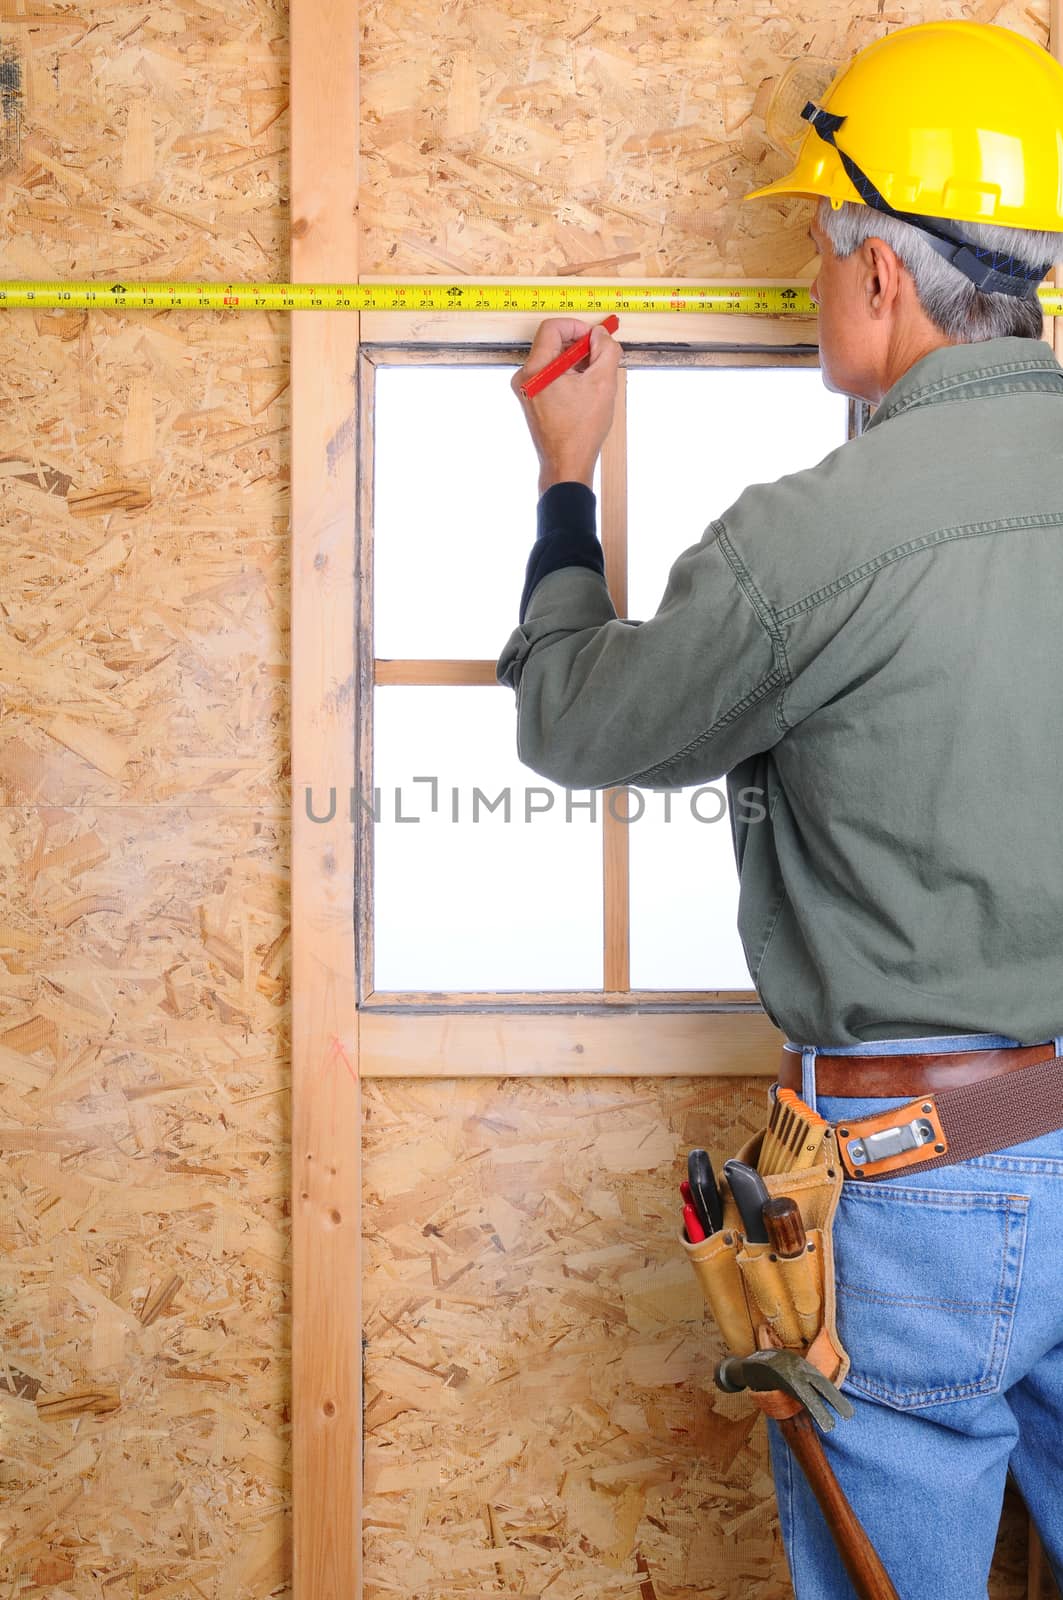 Closeup of a construction worker with a measuring tape marking a point on the wall he is building.